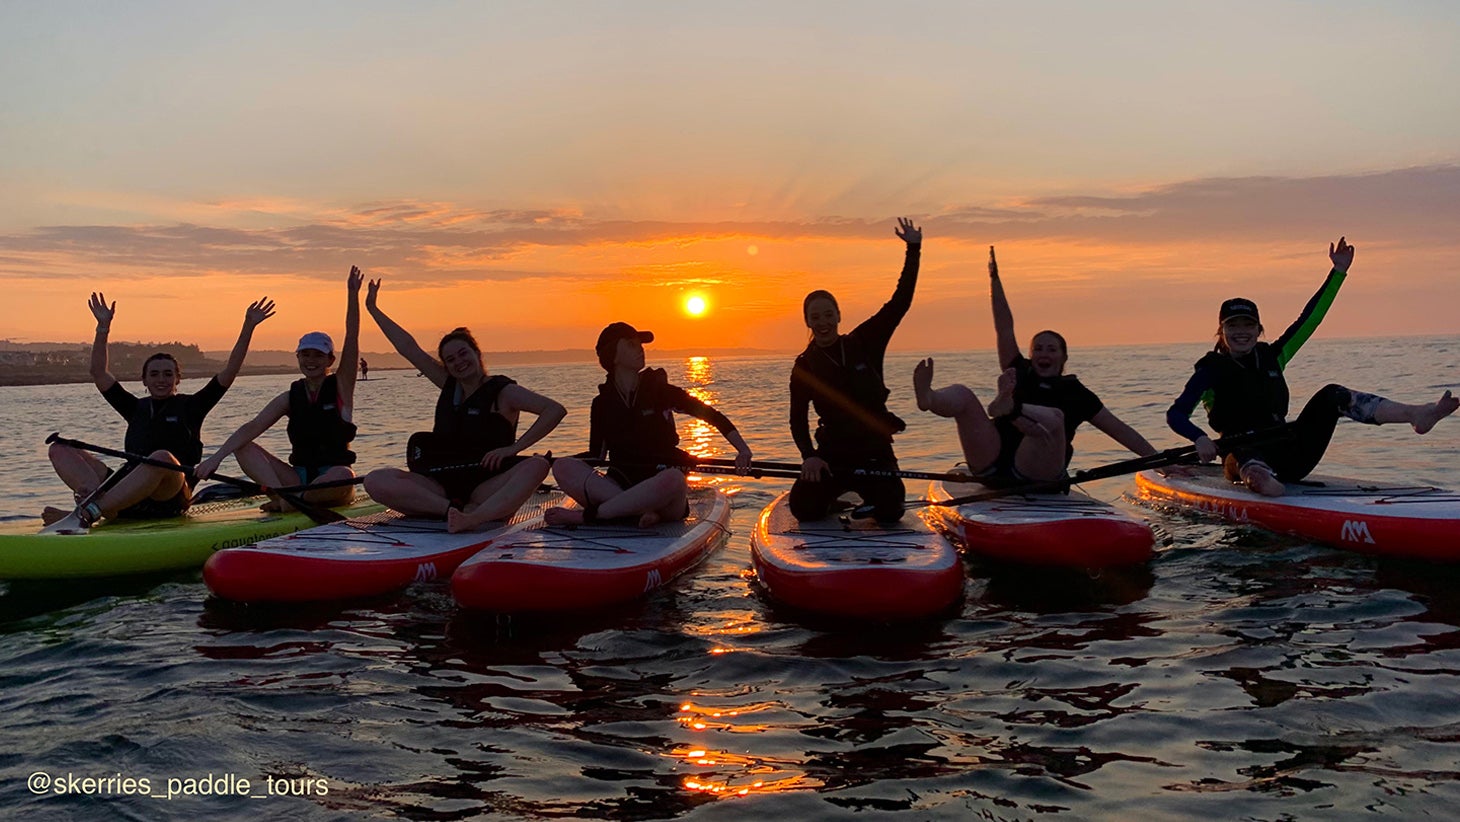 Group of Skerries Paddle Tours paddleboarders at sunset, Skerries, Dublin.